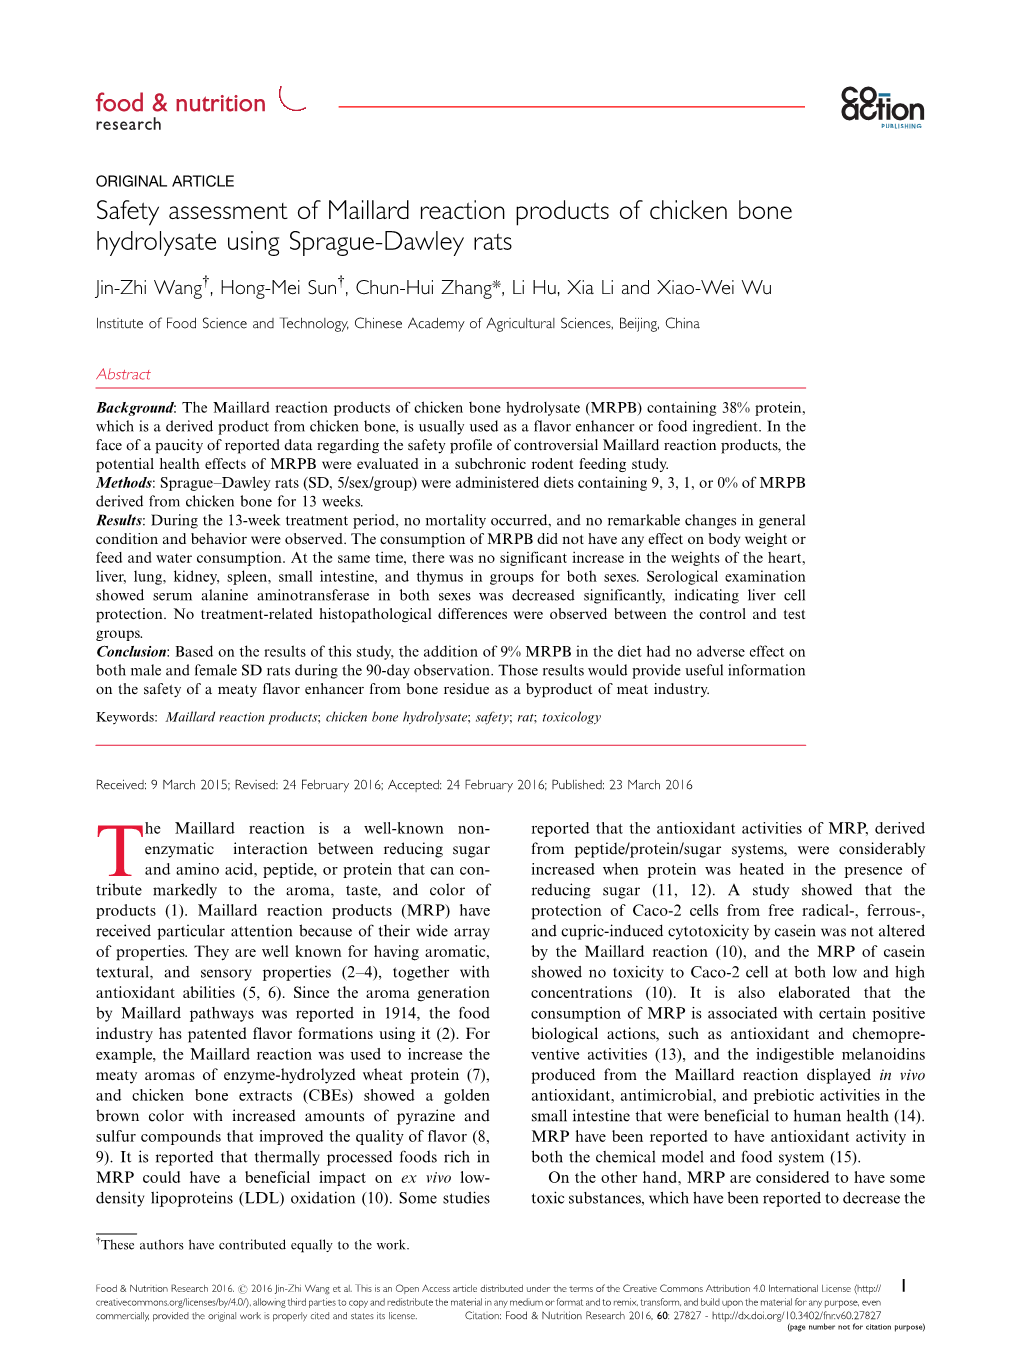 Safety Assessment of Maillard Reaction Products of Chicken Bone Hydrolysate Using Sprague-Dawley Rats